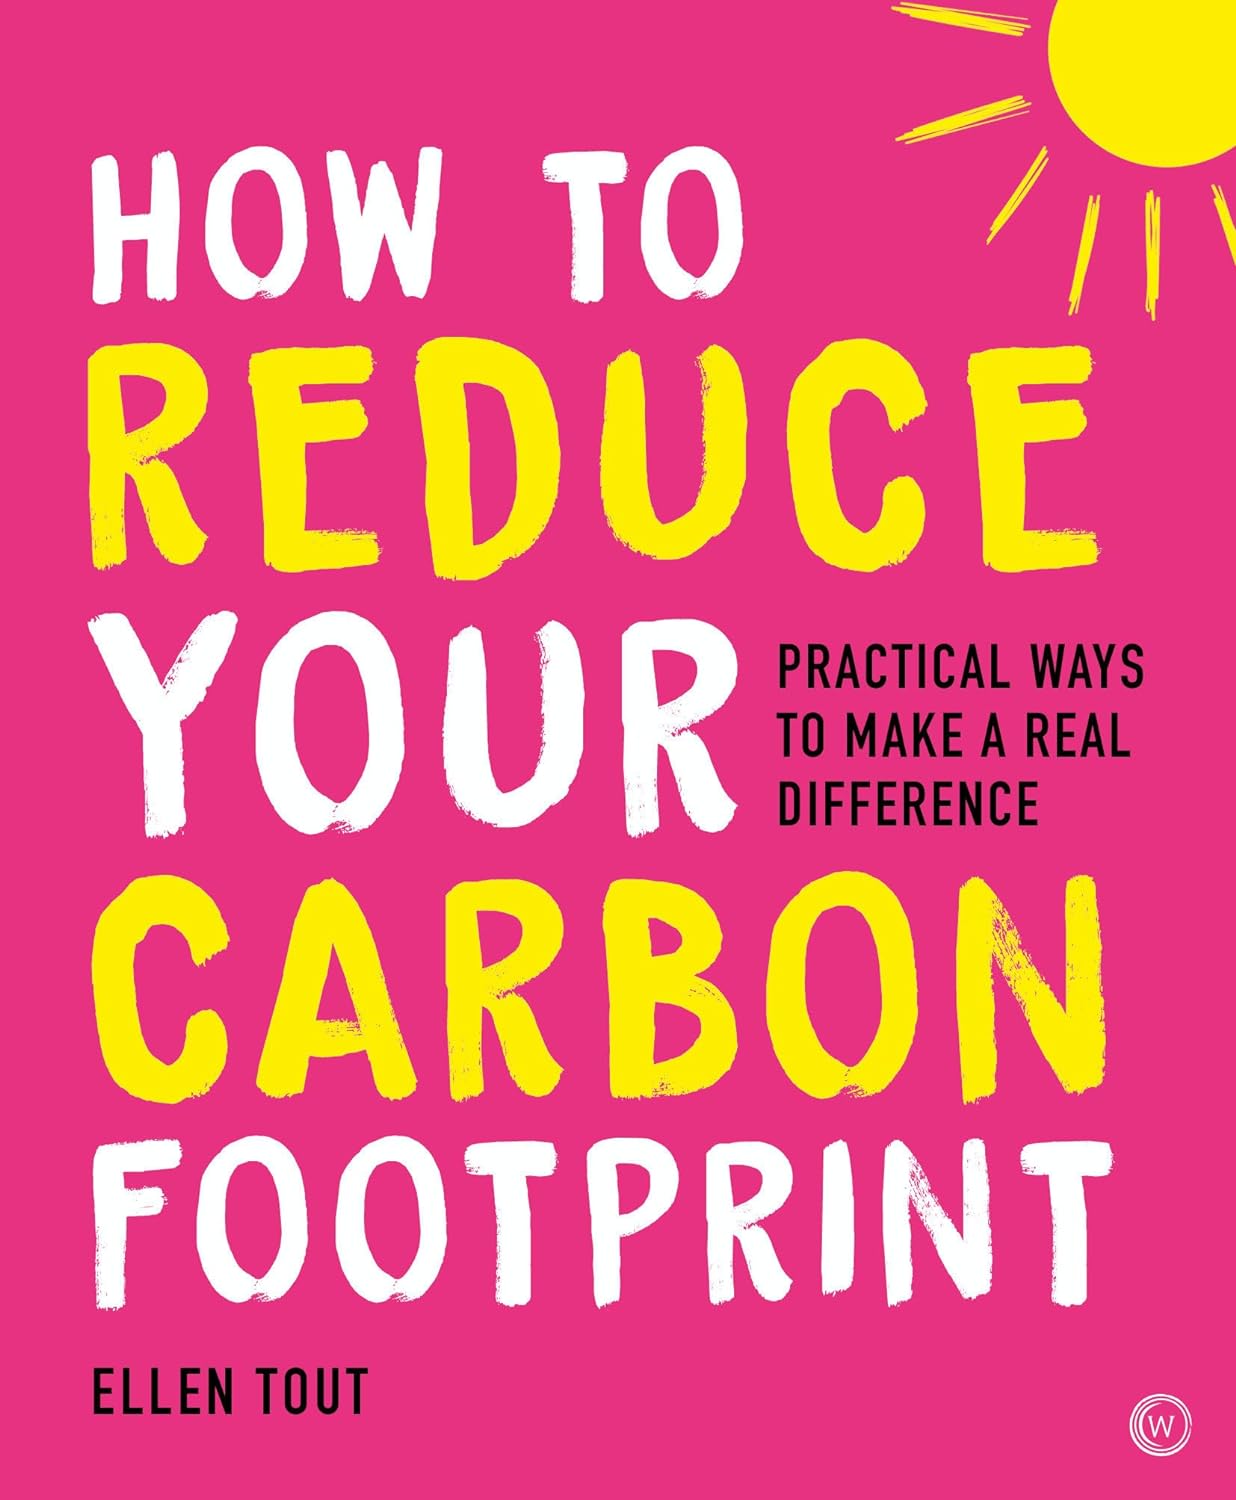 lots of ways to reduce your carbon footprint